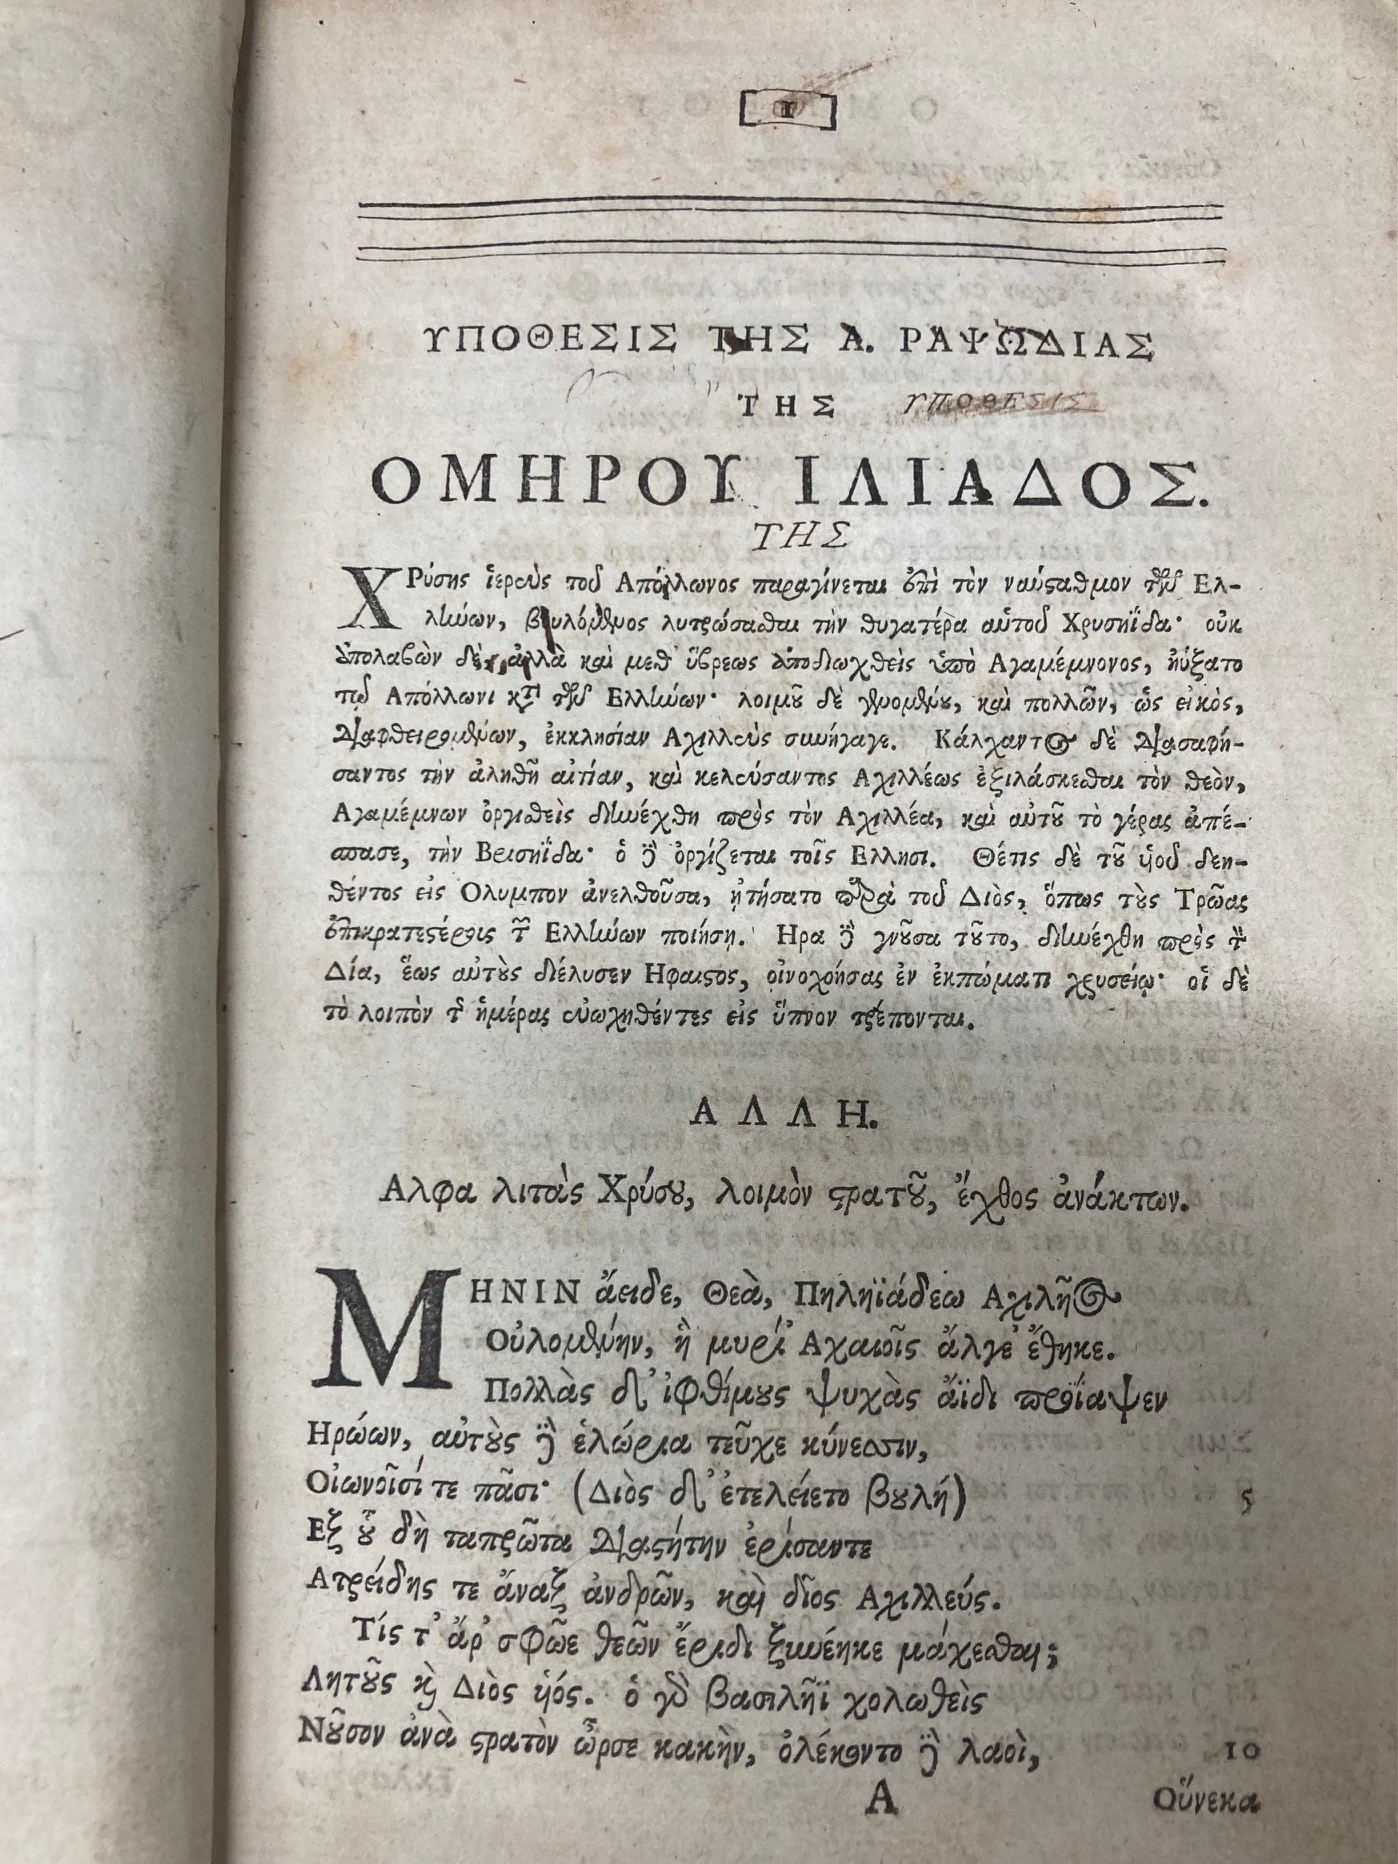 The first page of the Iliad, from the 1743 edition held in our rare book collection